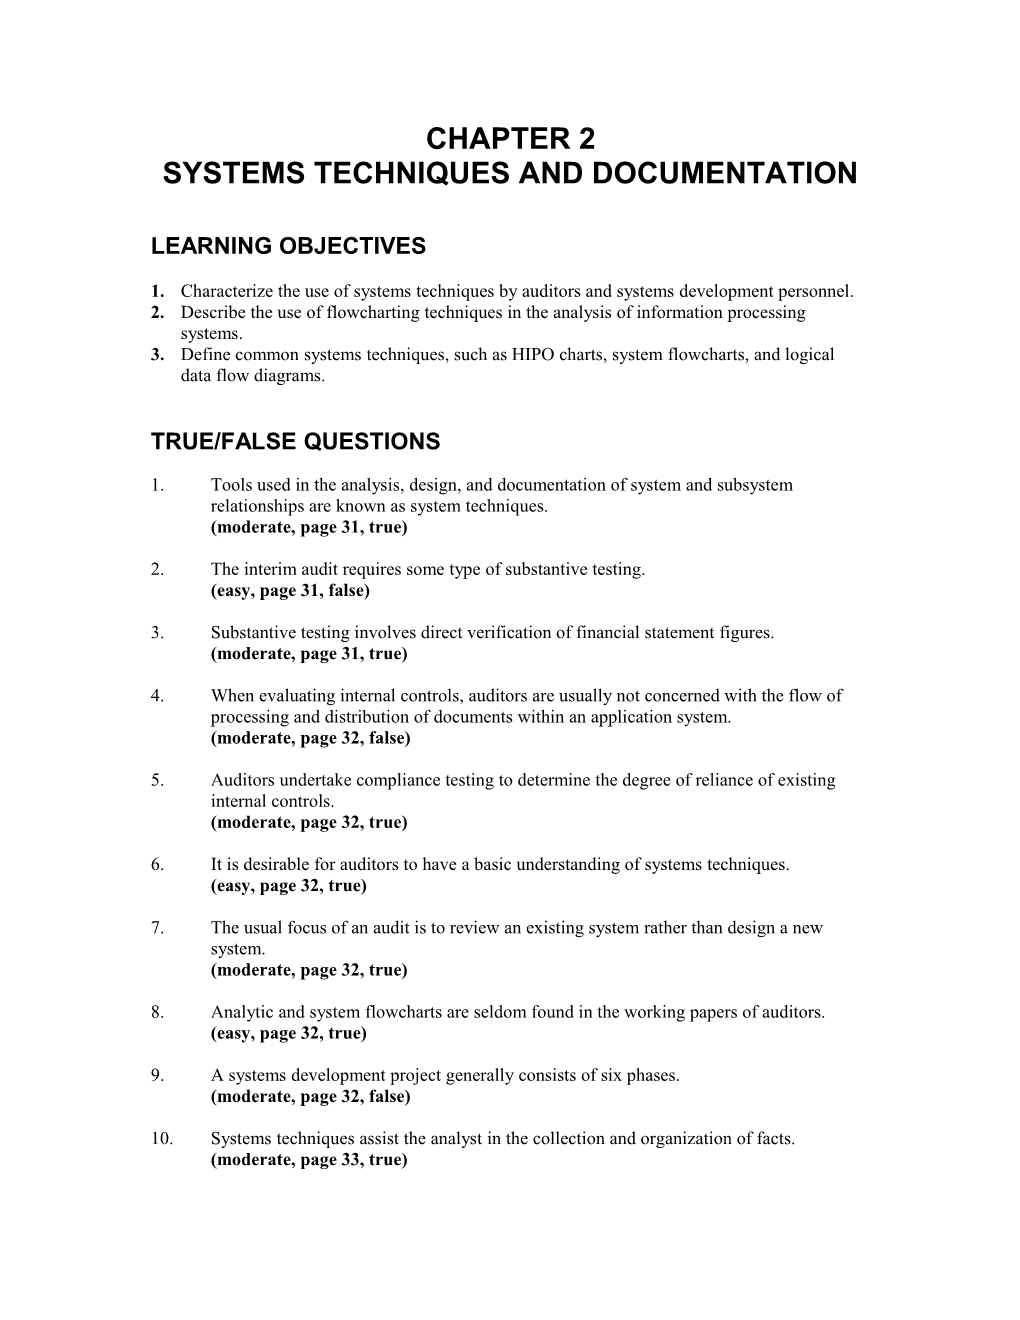 Systems Techniques and Documentation